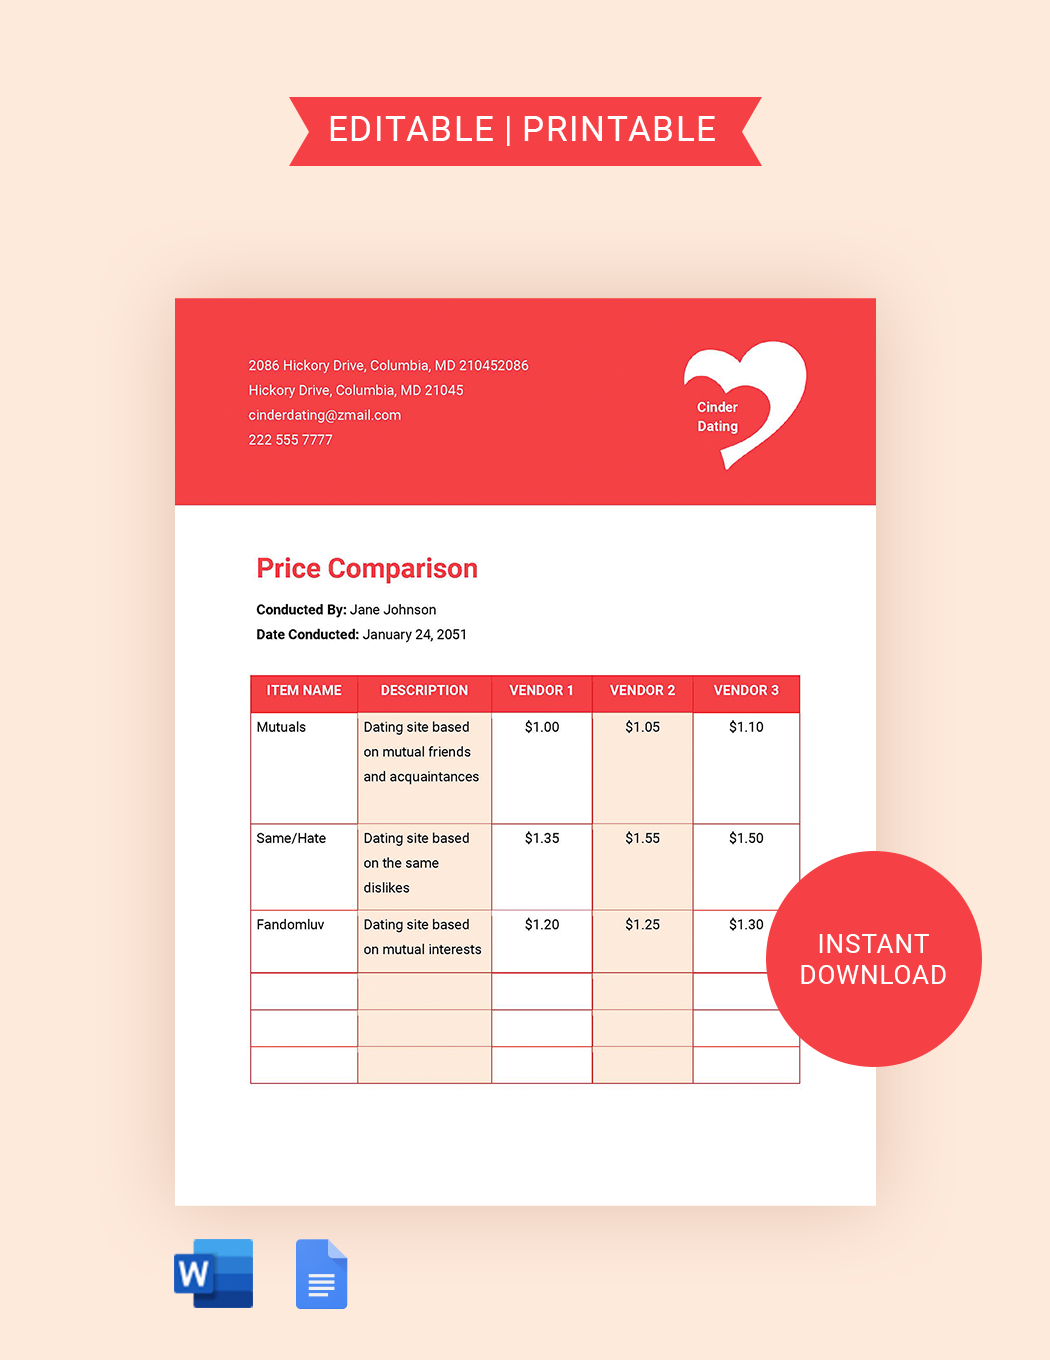 Dating Websites Price Comparison Template in Word, Google Docs